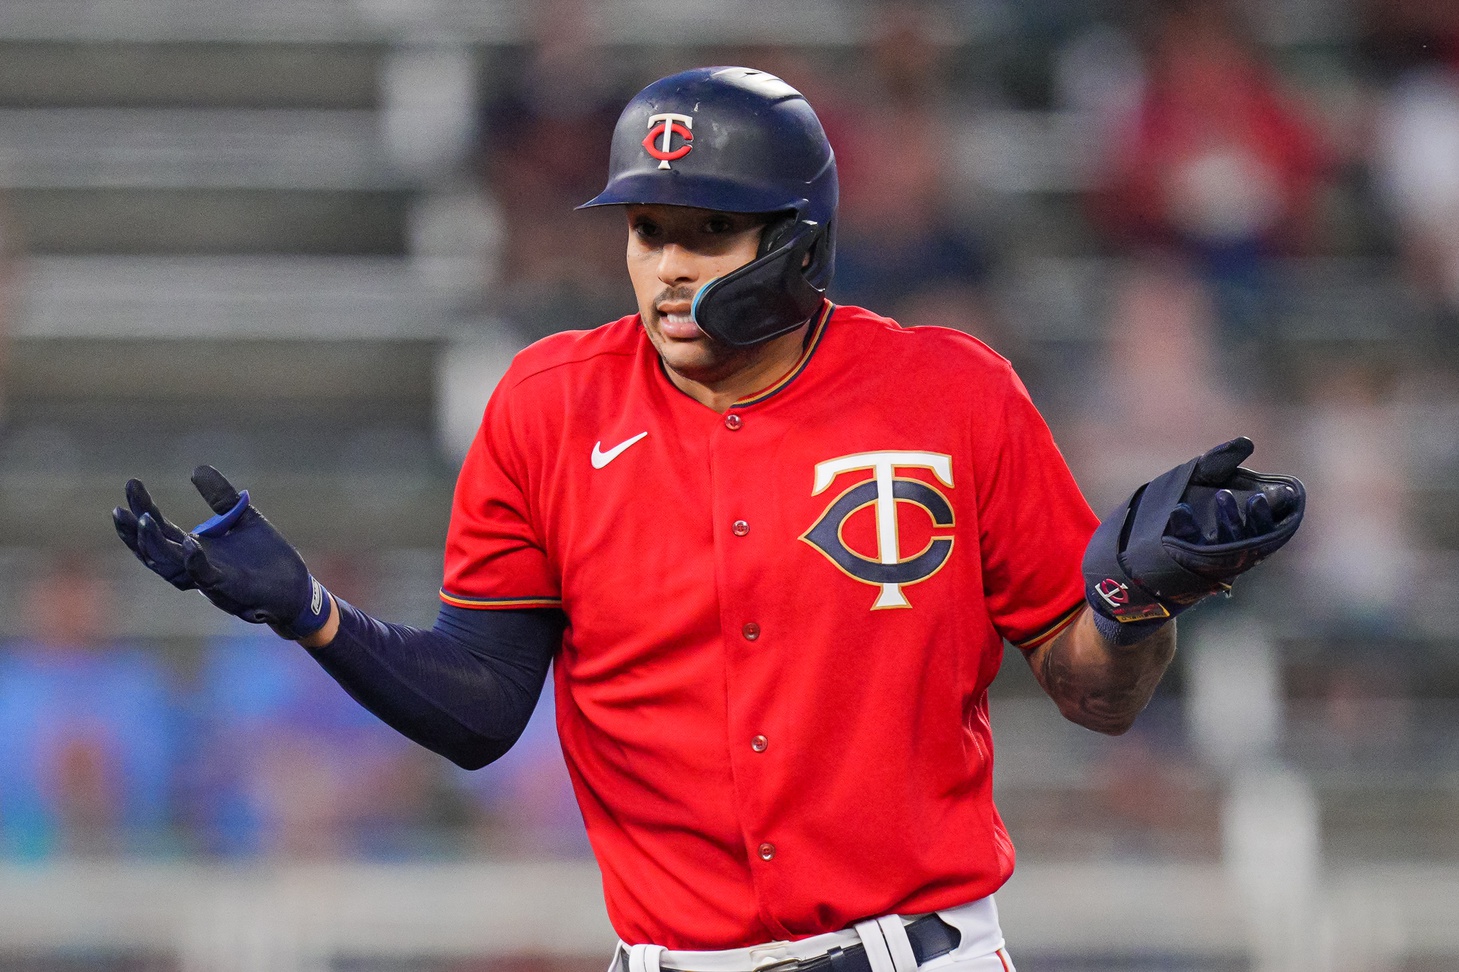 Carlos Correa: Maybe This Isn't a Bad Thing - Twins - Twins Daily